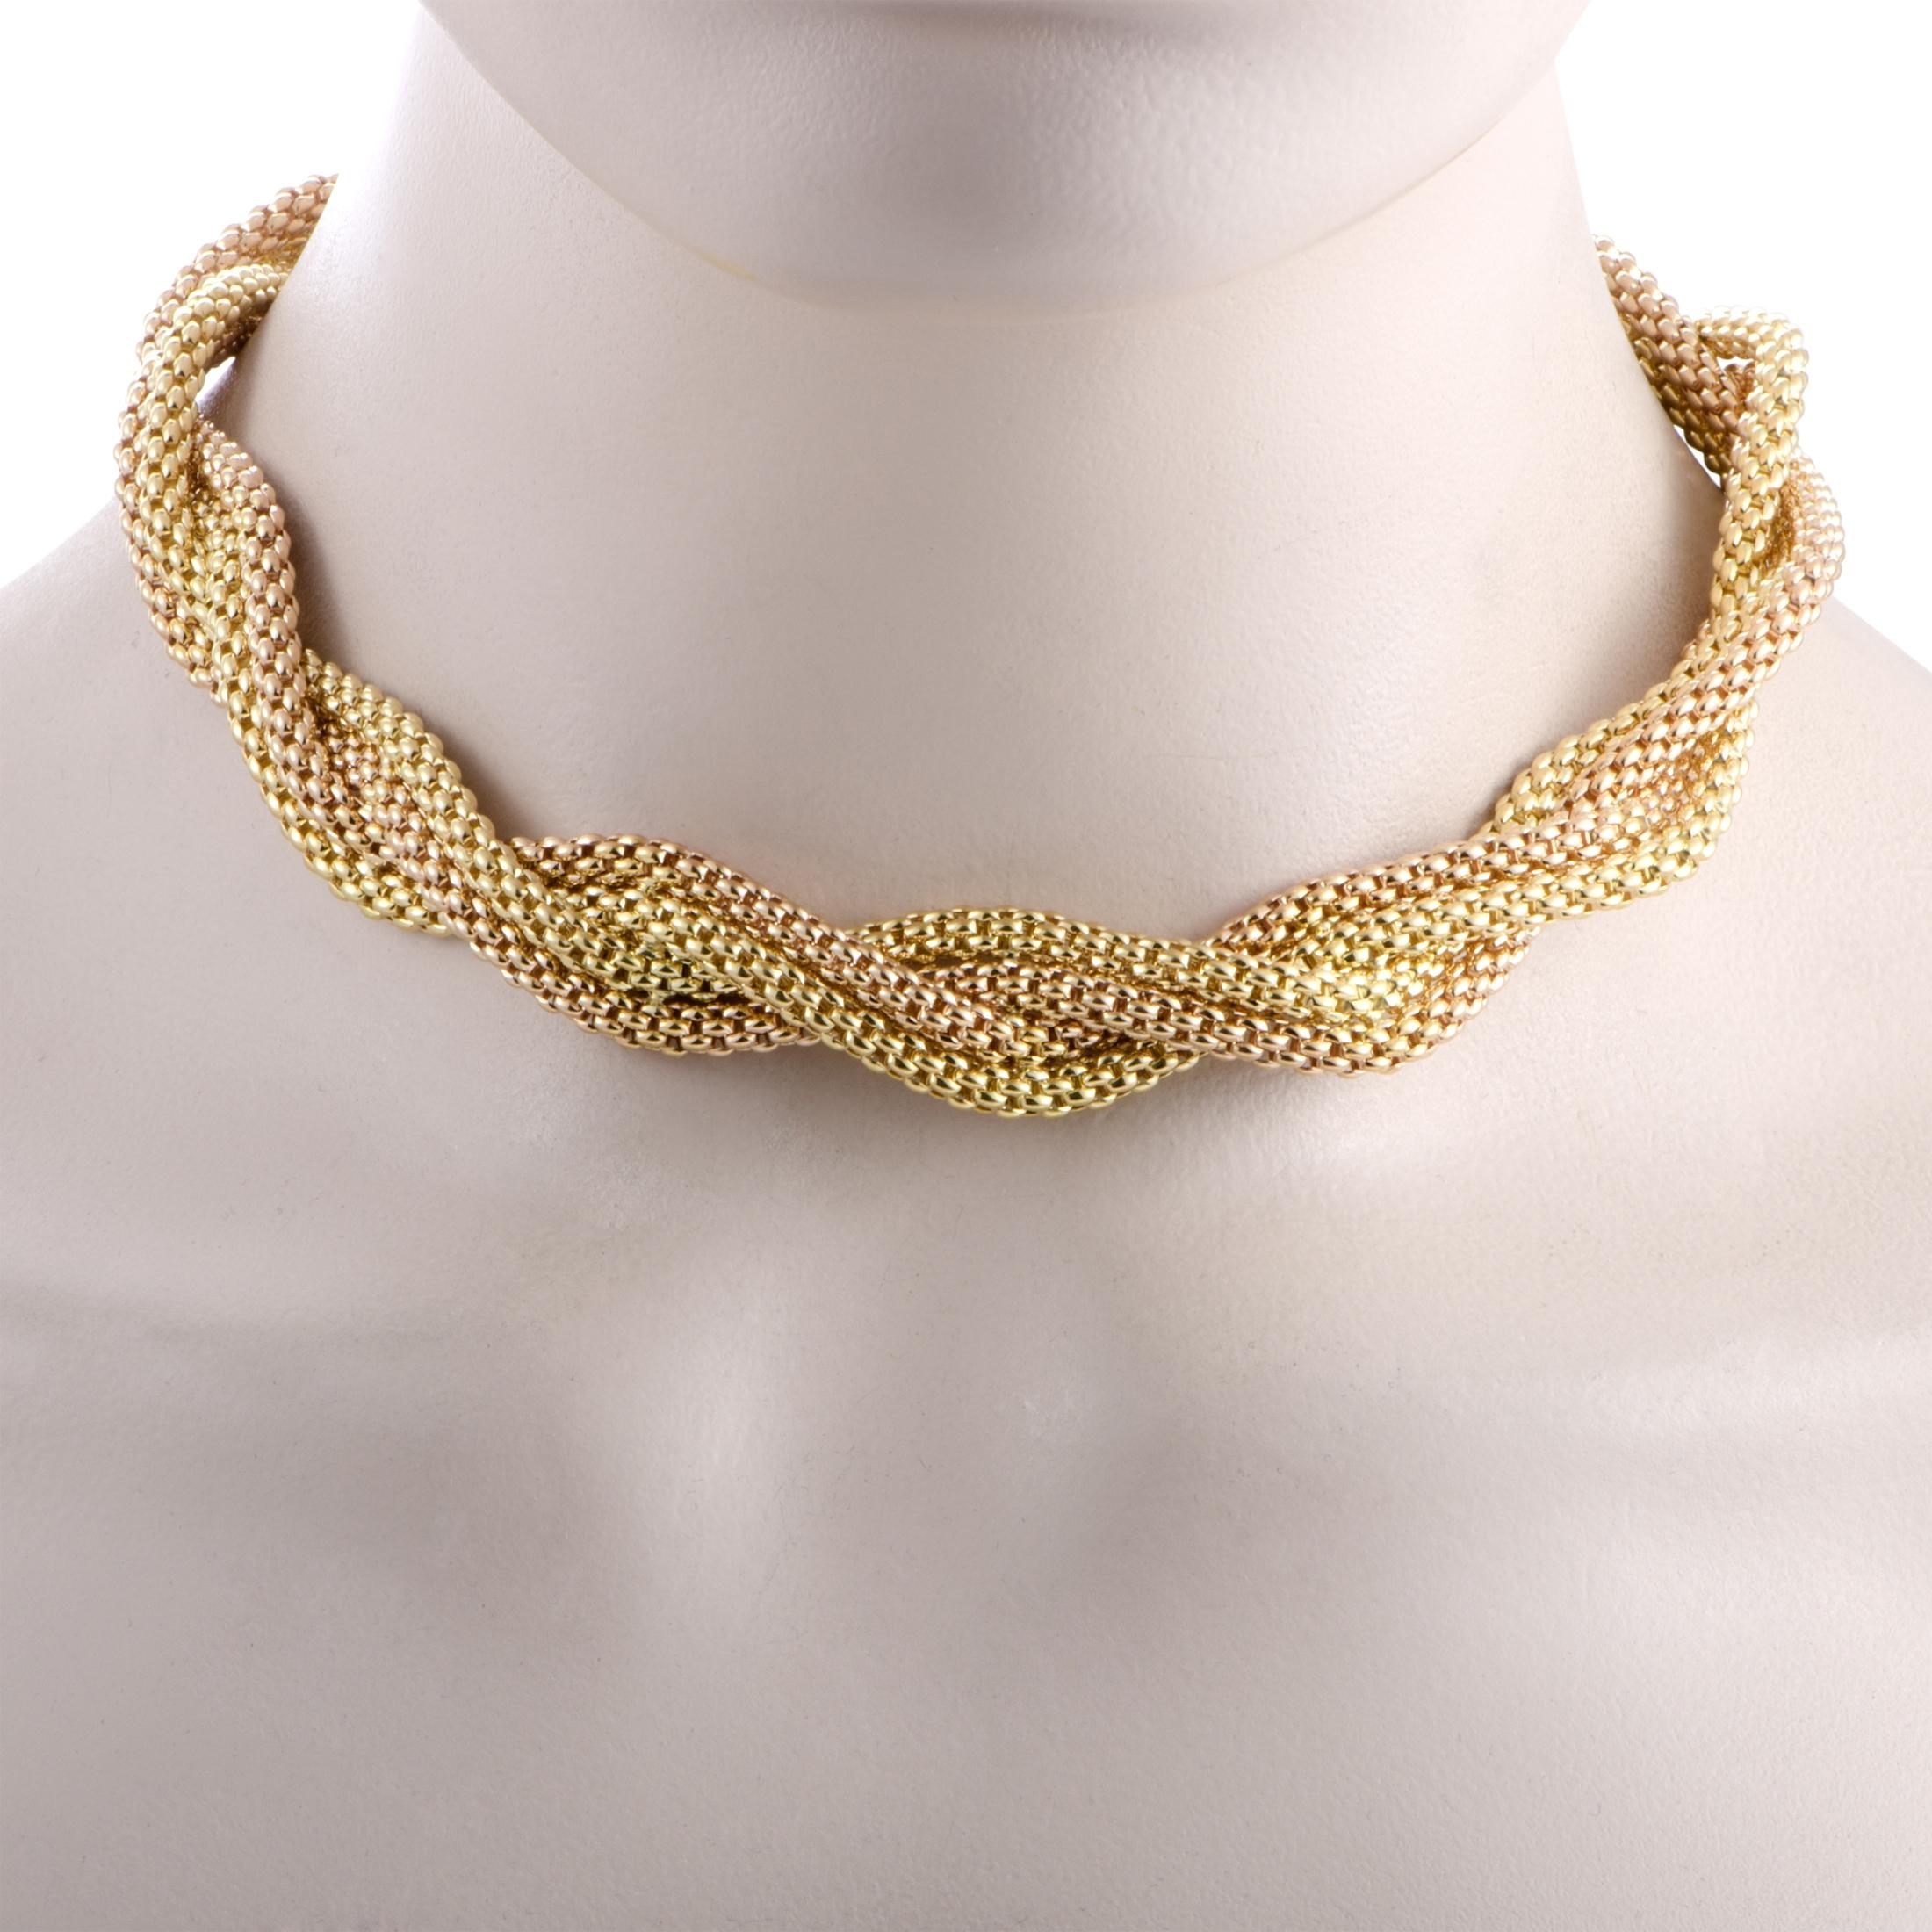 The compellingly offbeat allure of the extraordinary design and the enticing radiance of 18K yellow and rose gold give an incredibly attractive appeal to this fascinating necklace from FOPE that will convert any outfit of yours into a standout